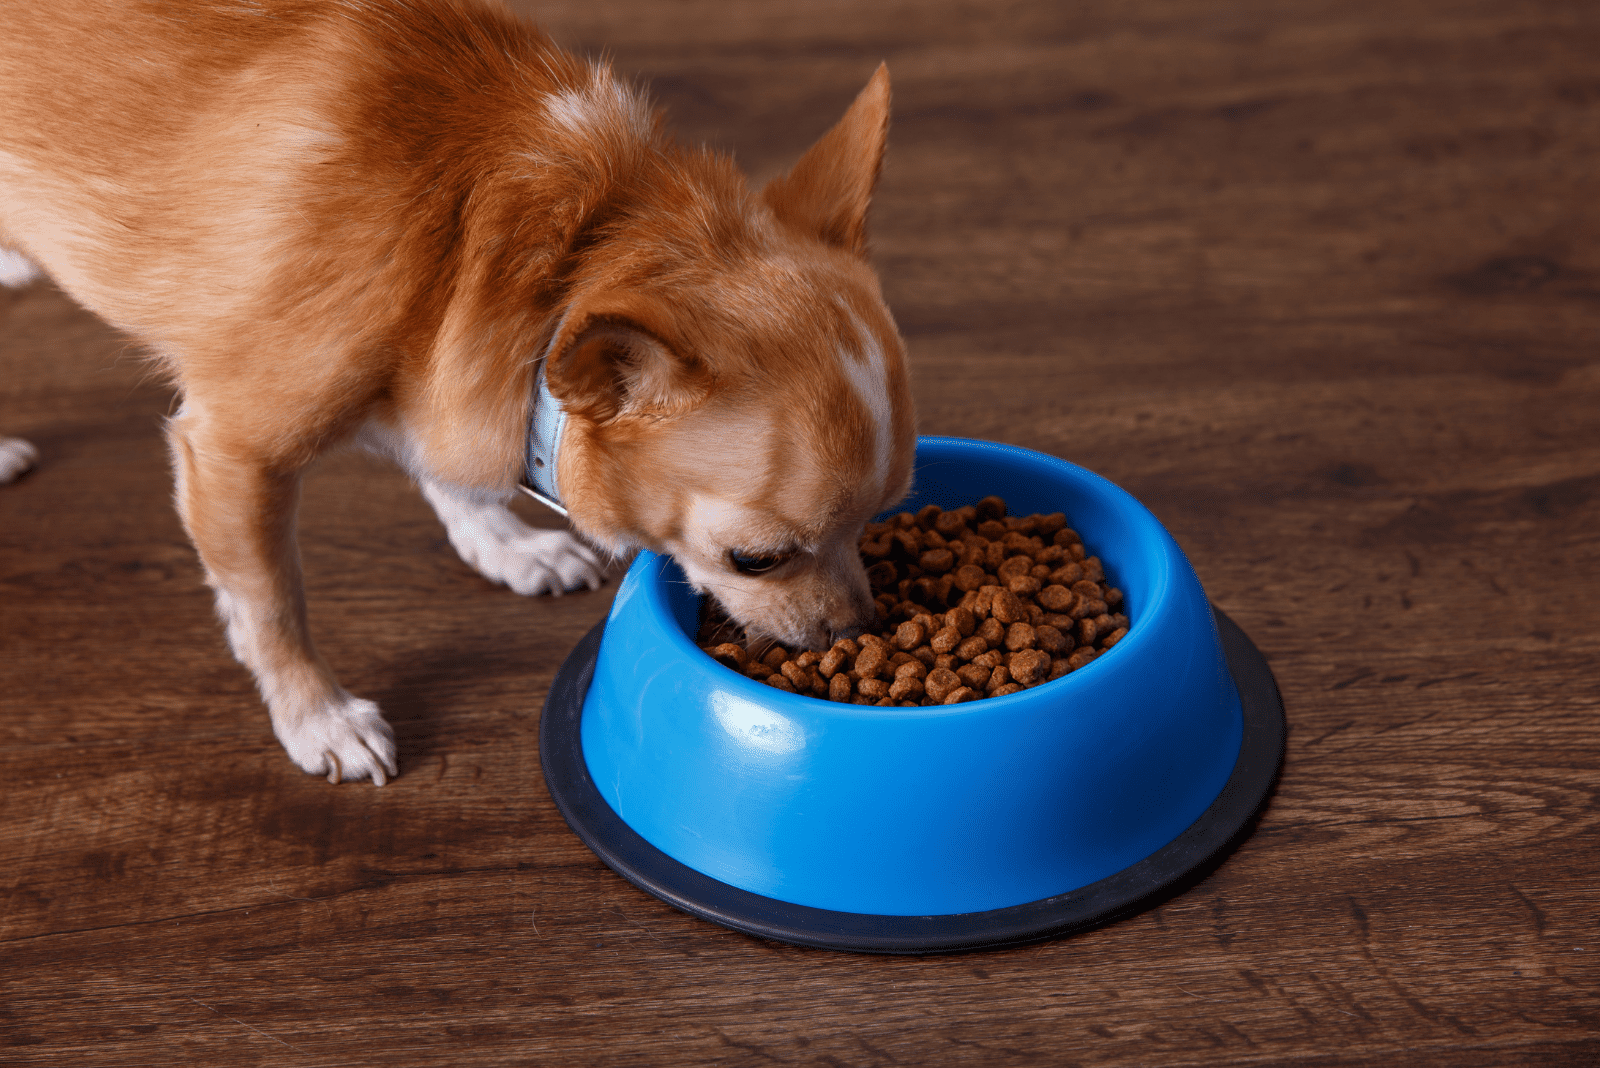 the dog eats food from the bowl